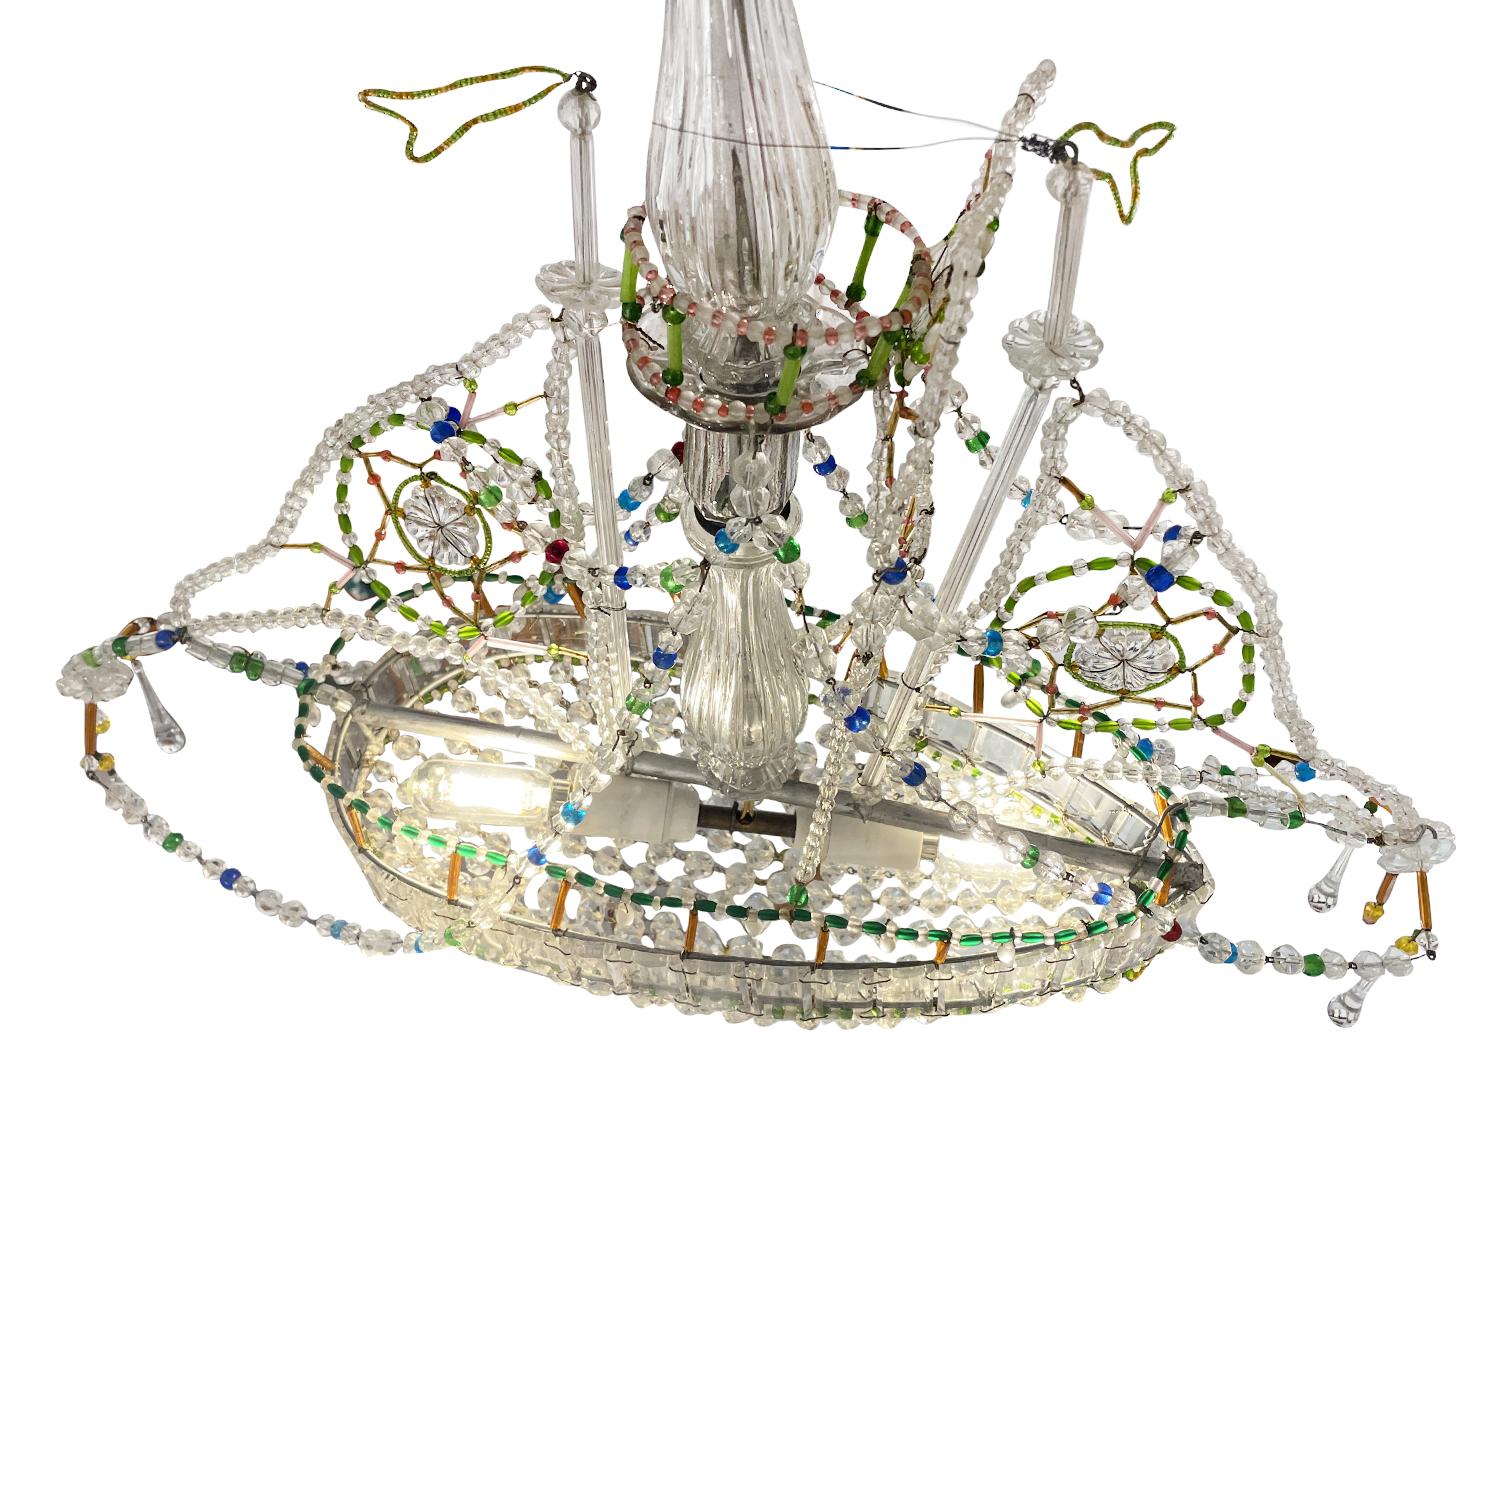 20th Century French Crystal Glass Sail Ship Boat Pendant - Vintage Ceiling Light In Good Condition For Sale In West Palm Beach, FL